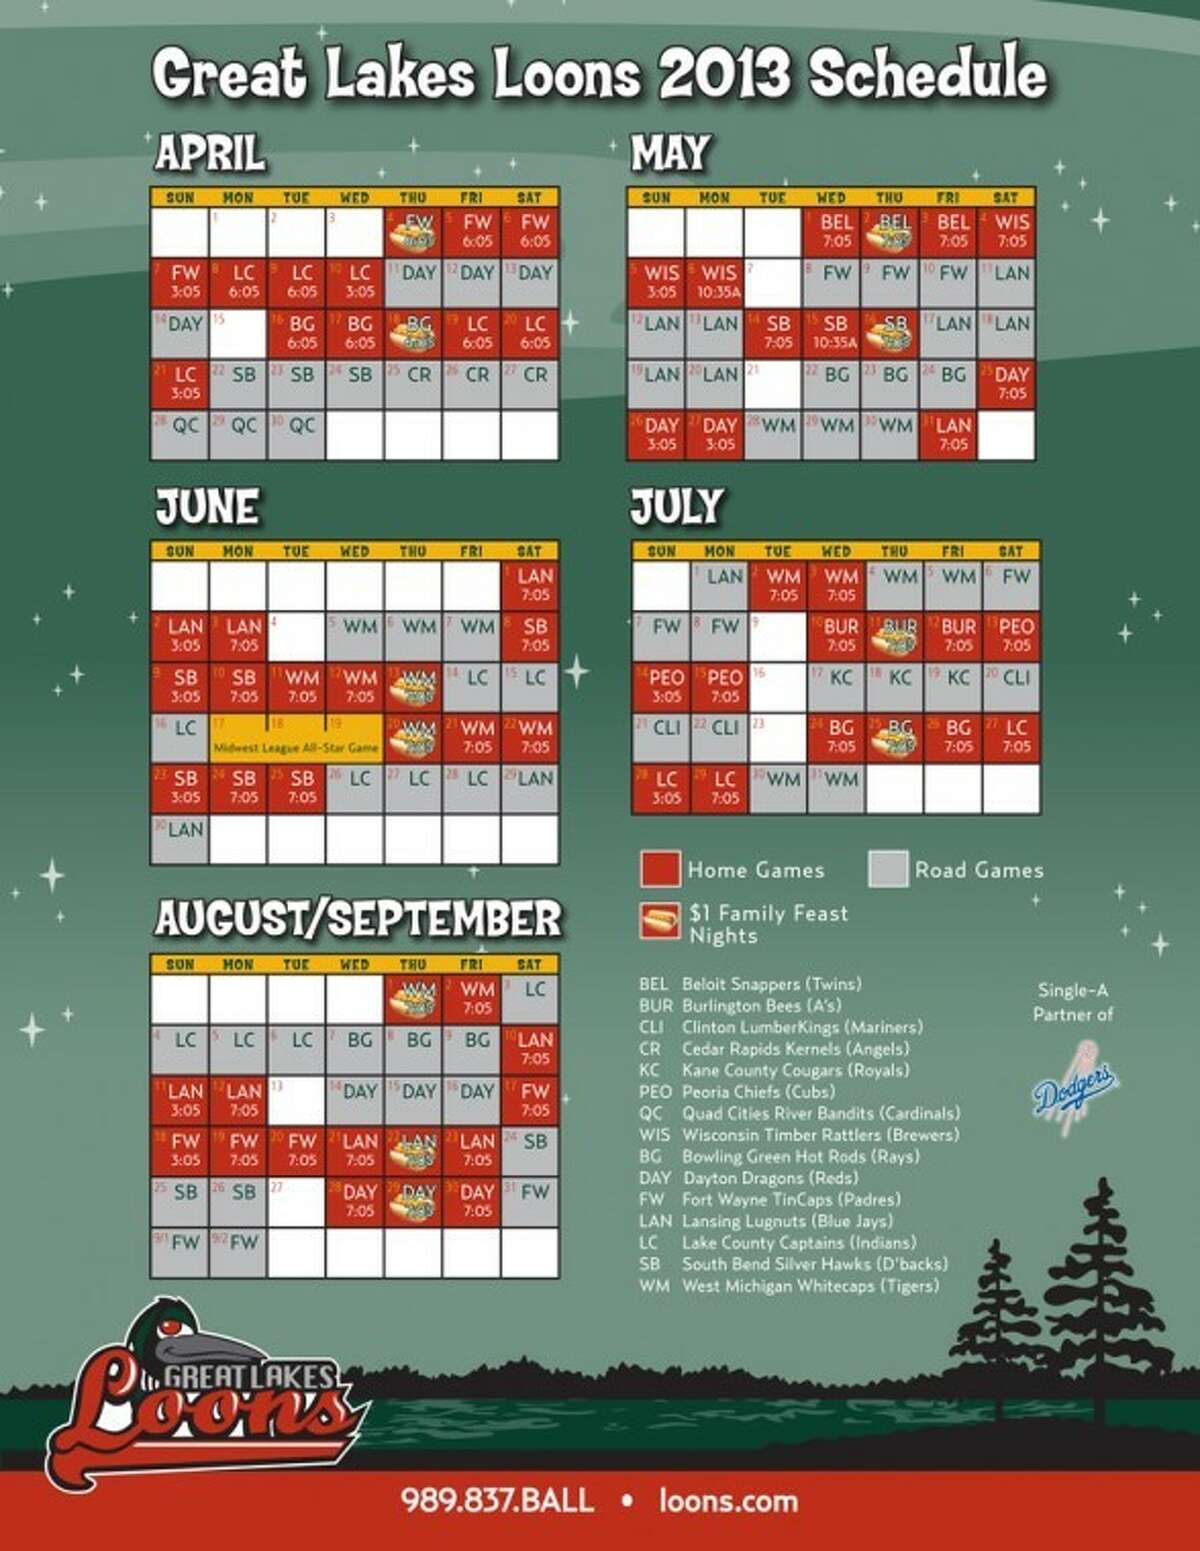 Great Lakes Loons announce 2013 season schedule